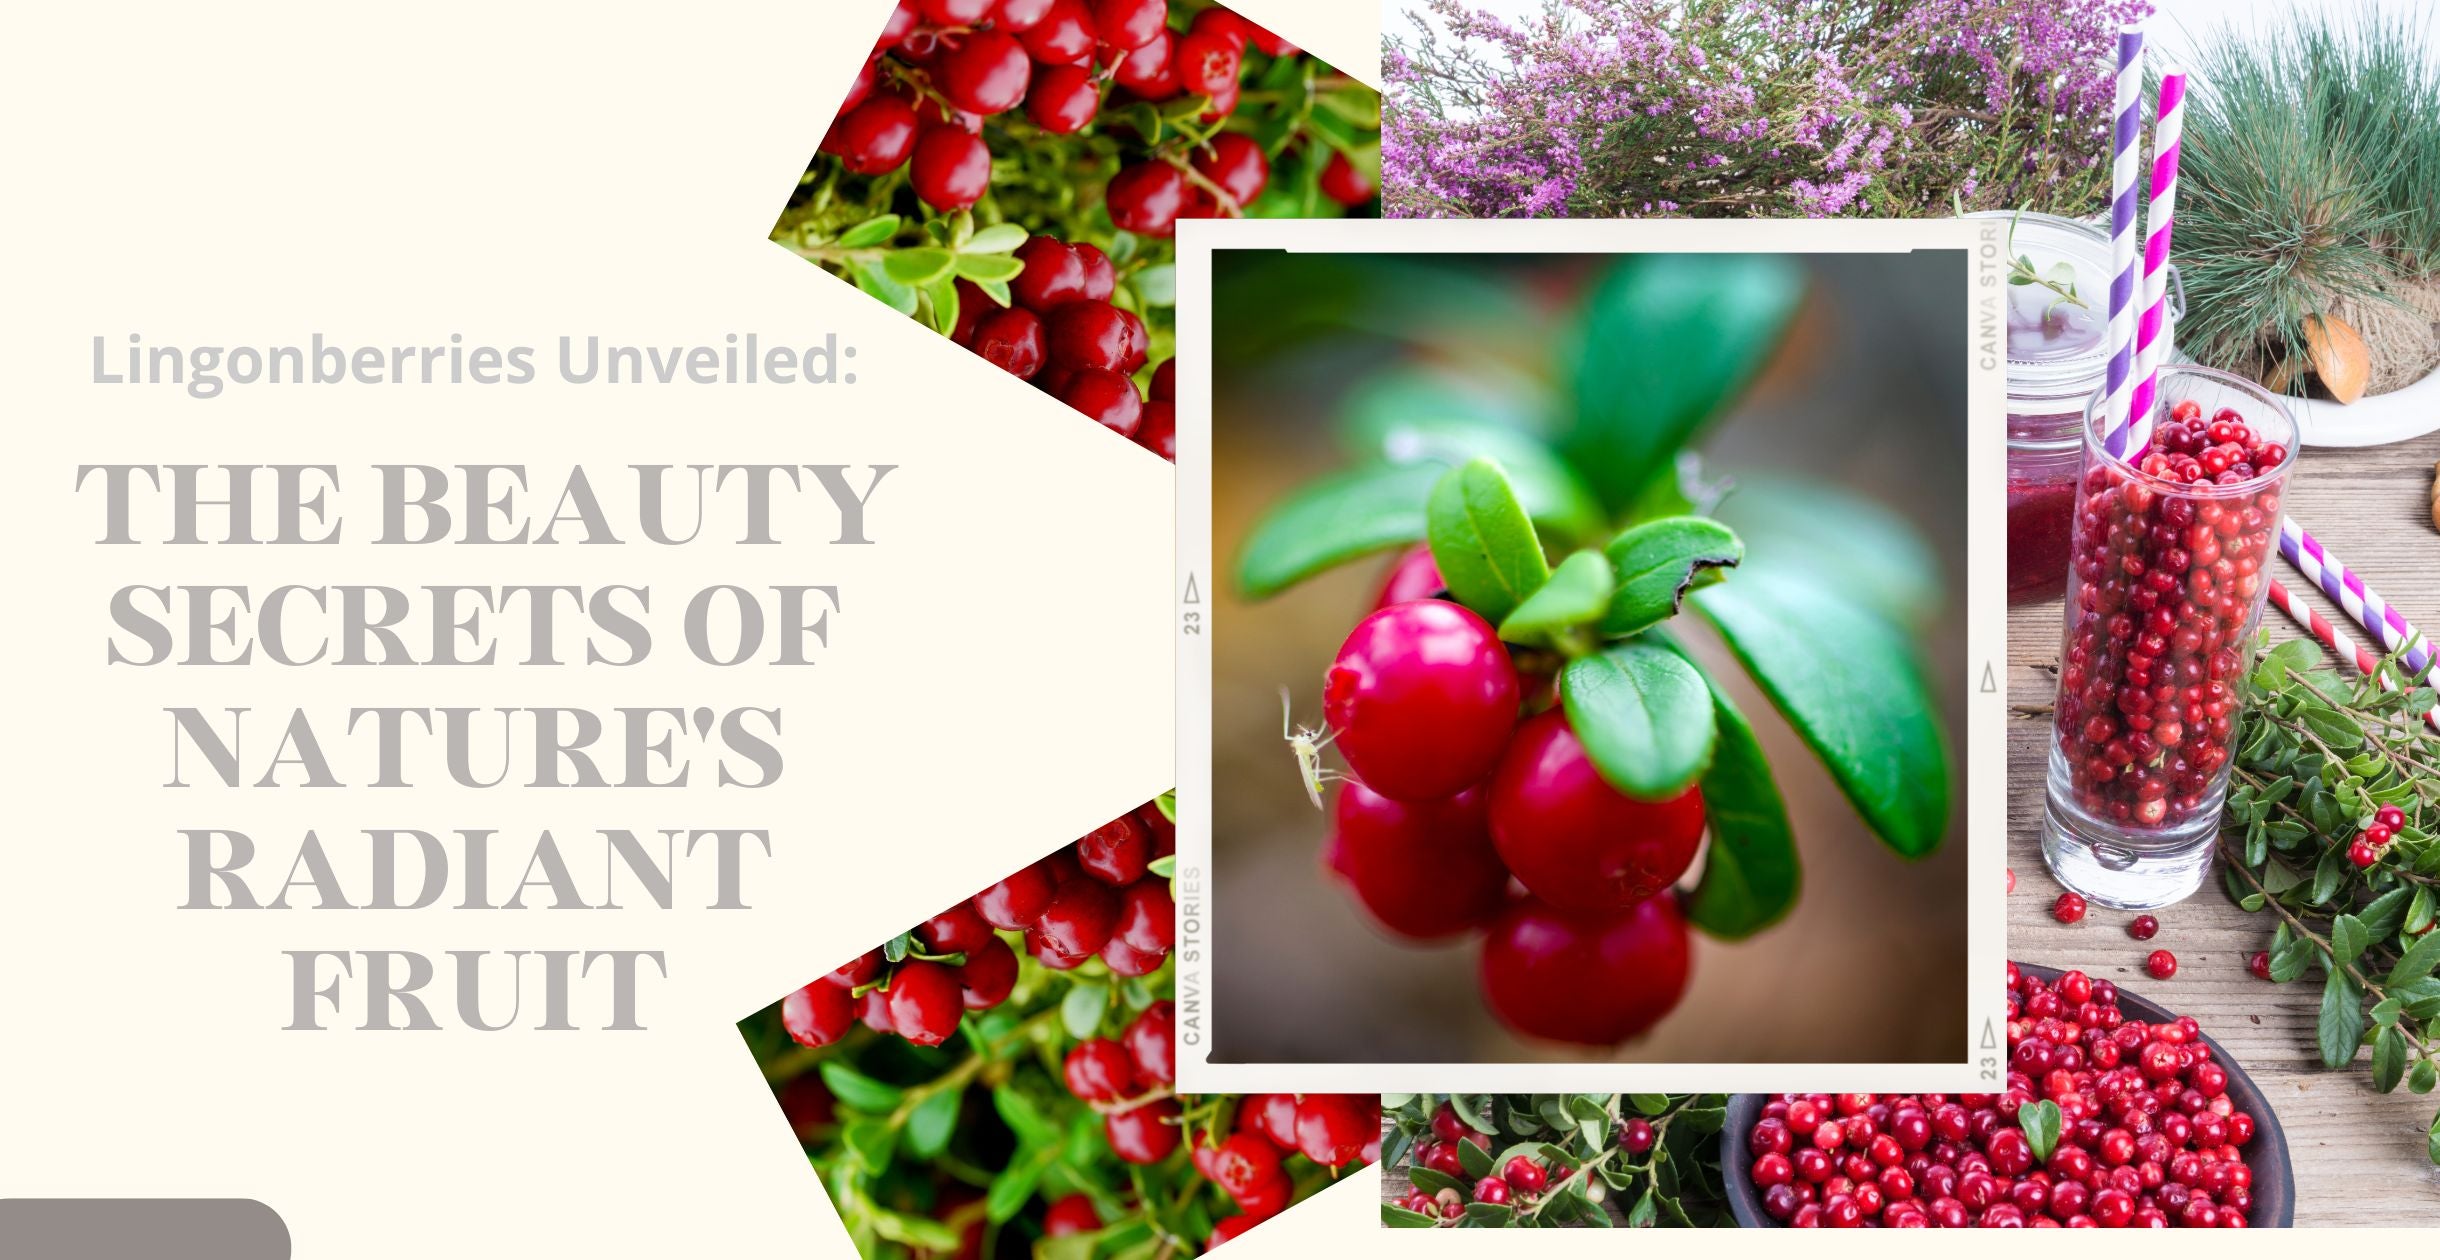 Lingonberries Unveiled: The Beauty Secrets of Nature's Radiant Fruit